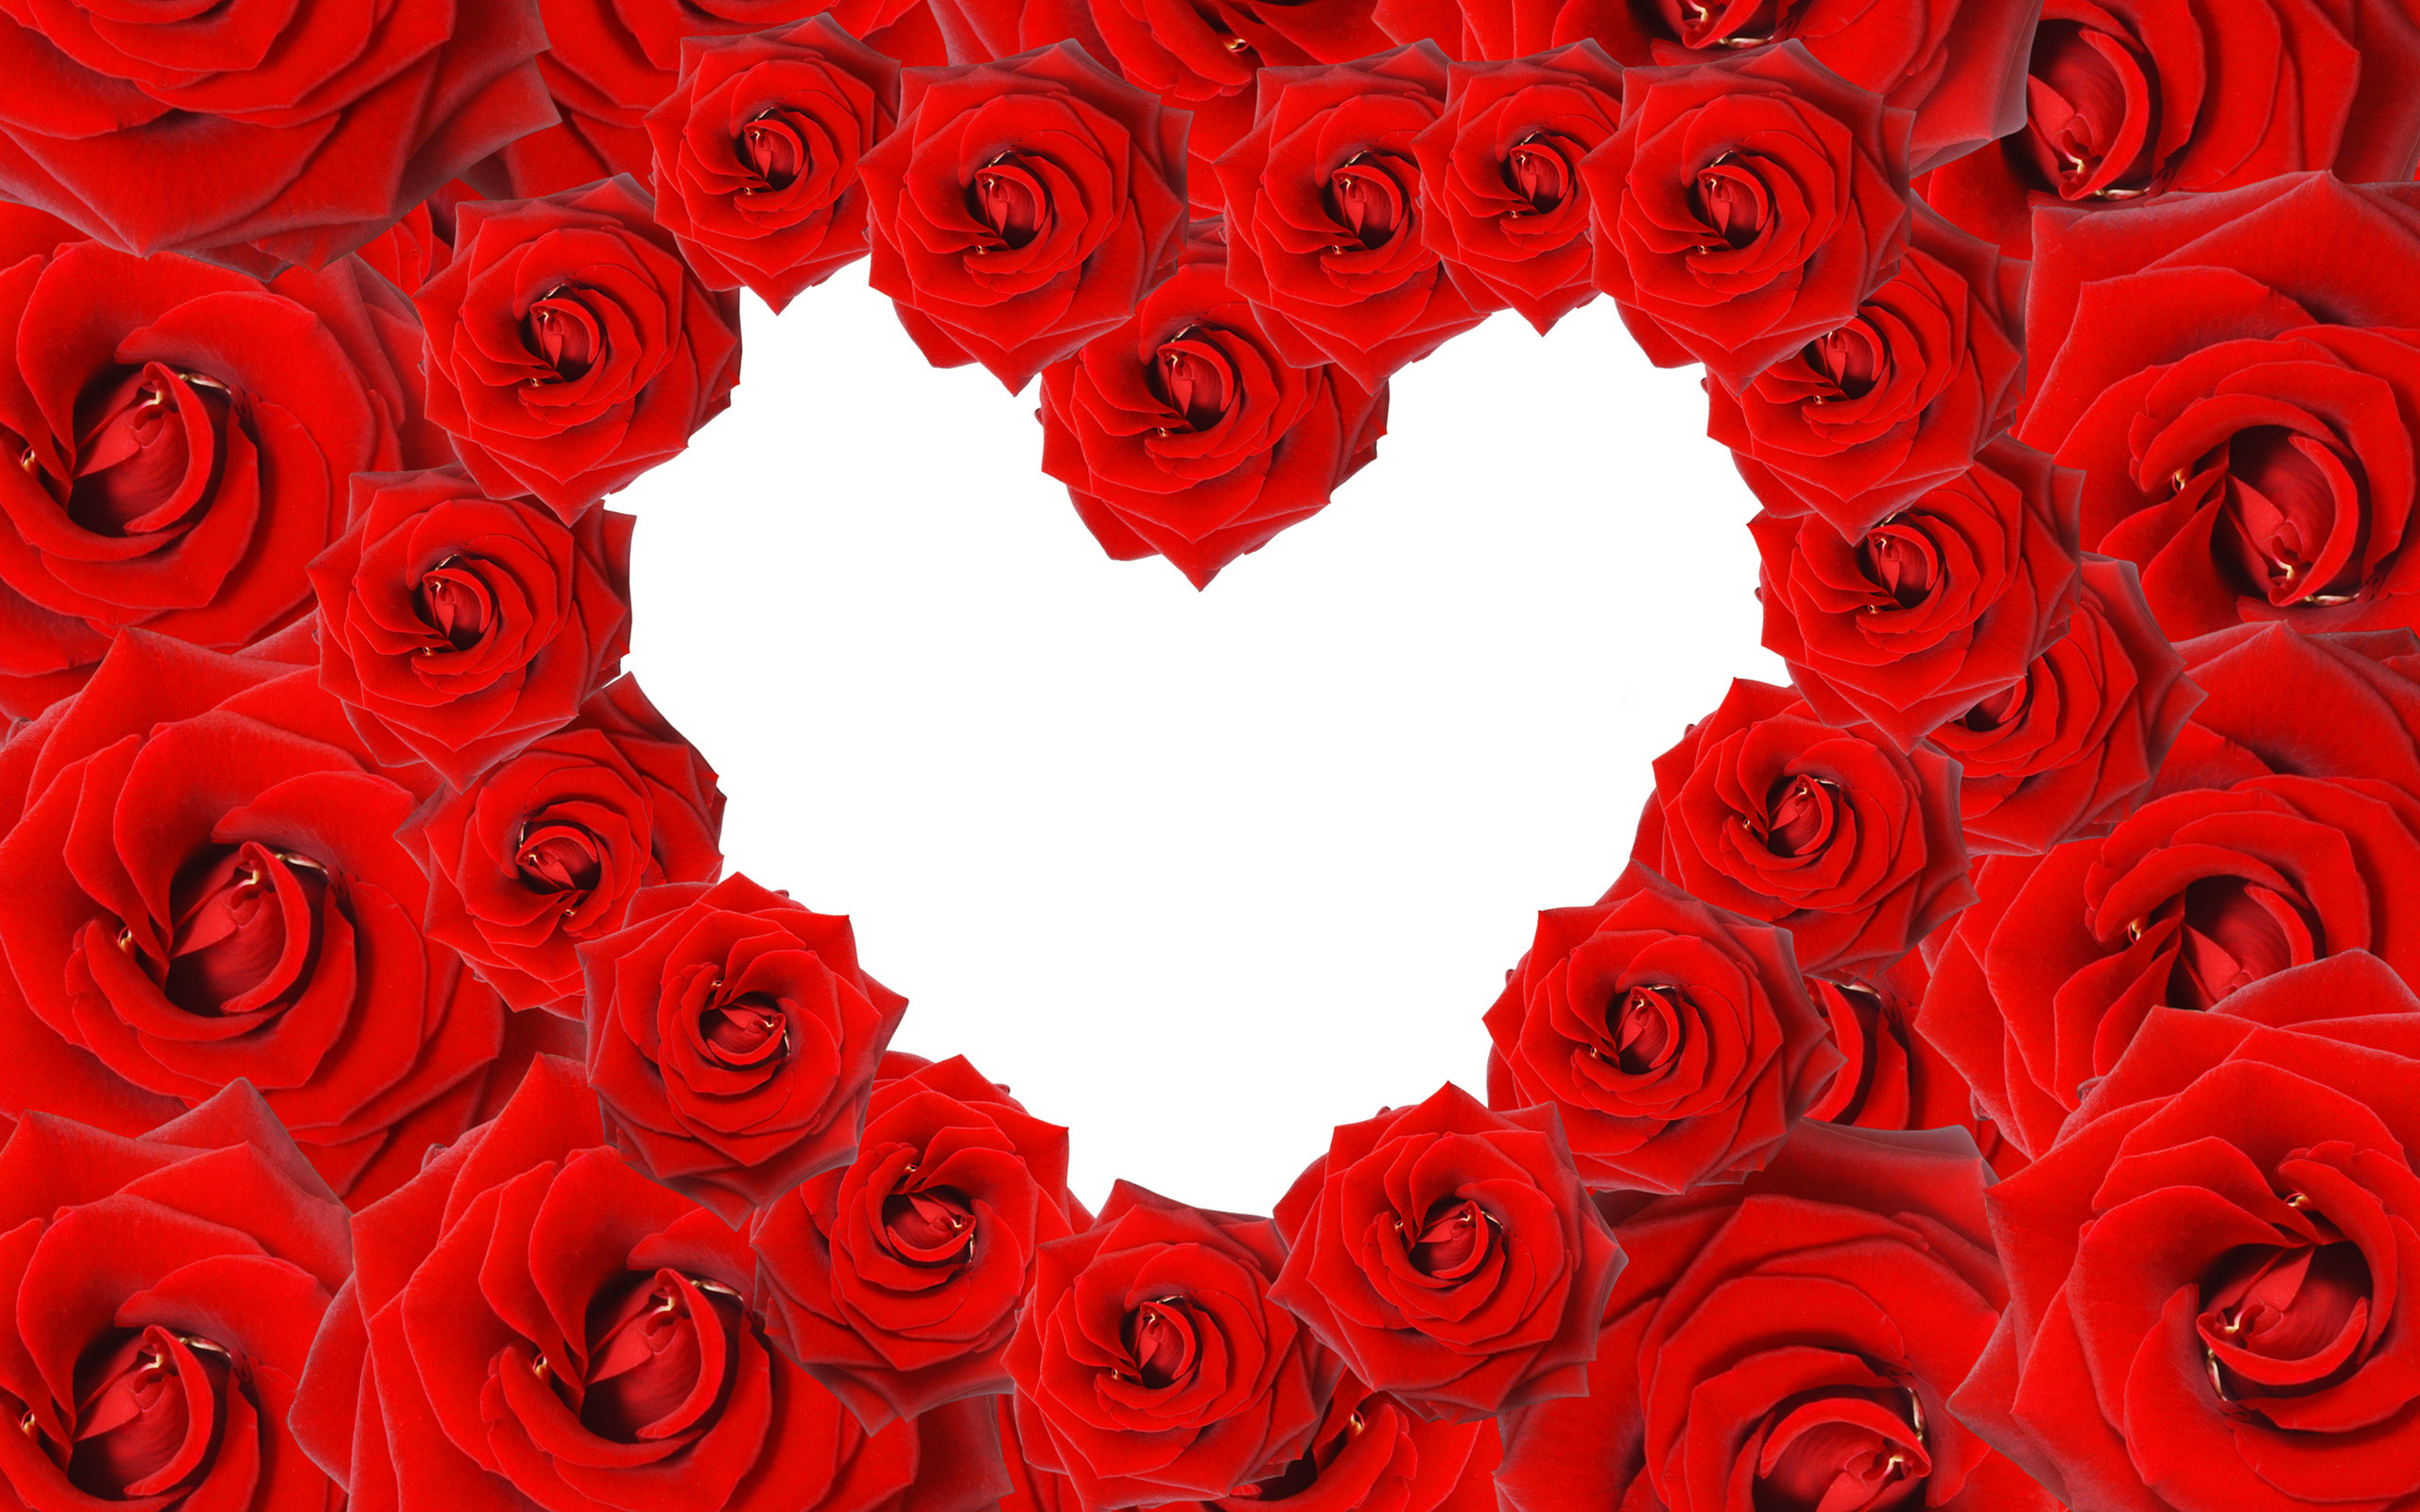 Red Roses & Love Heart Wallpapers | HD Wallpapers | ID #8639